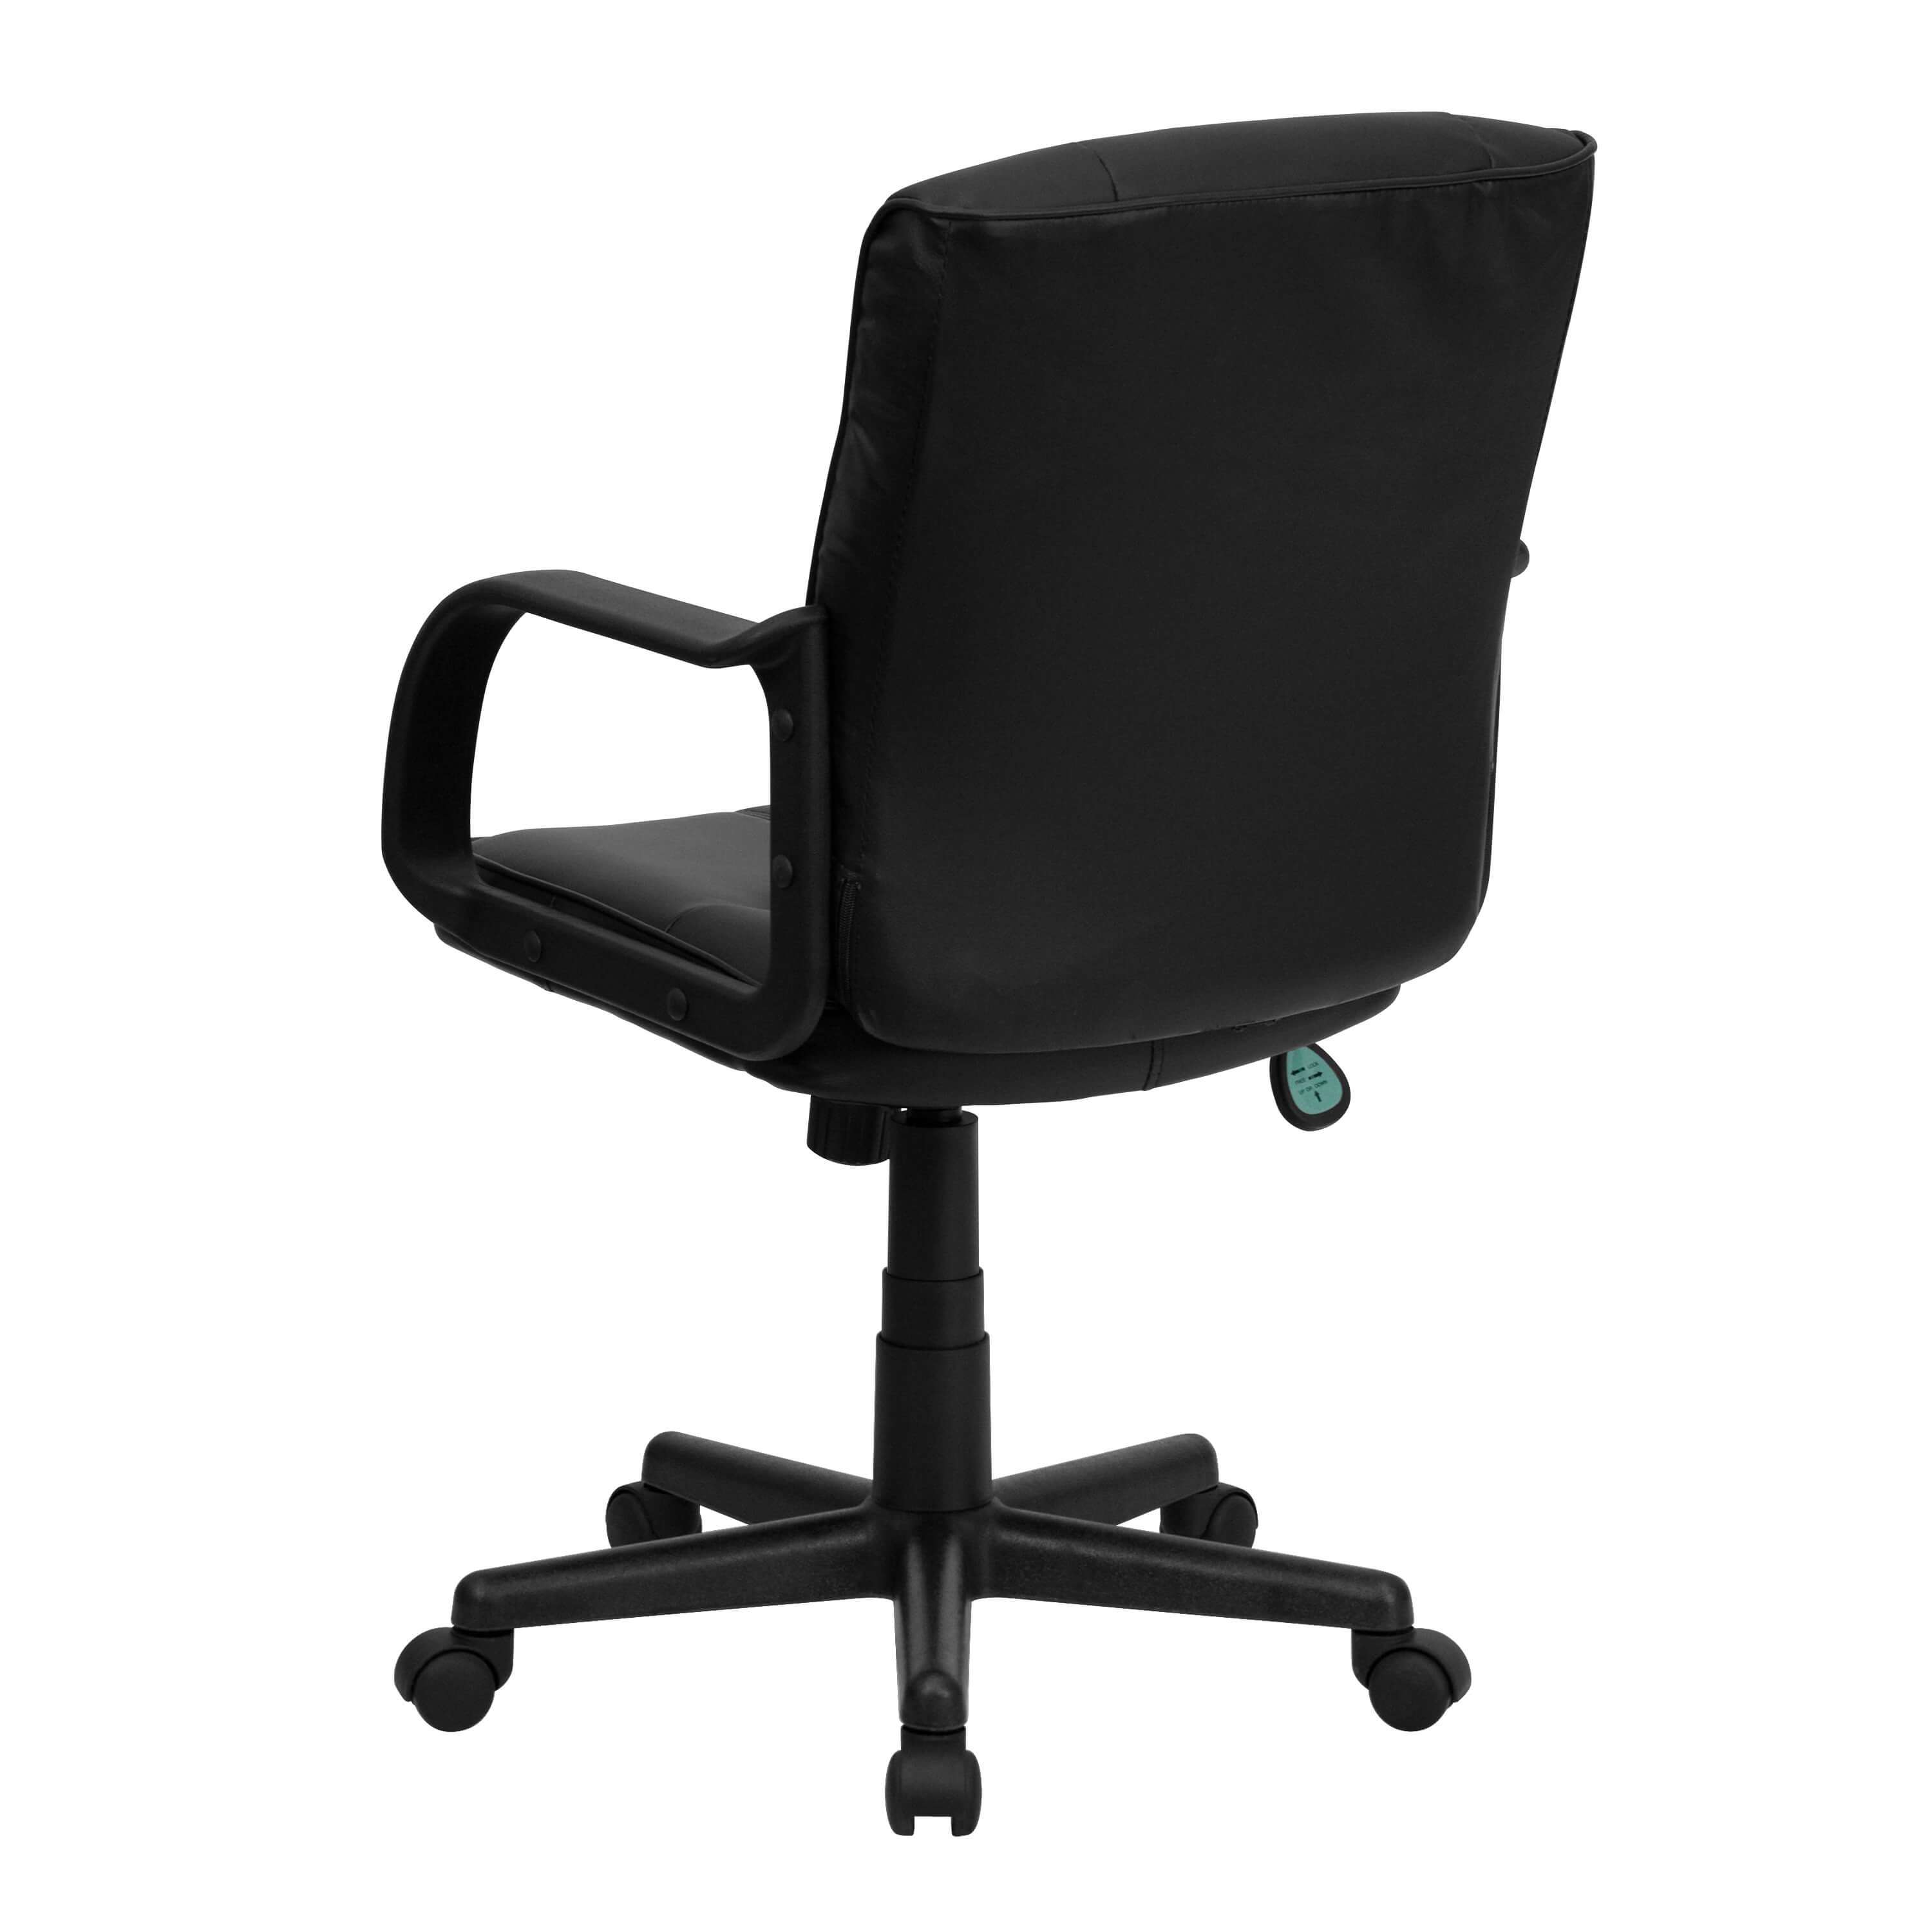 Black leather office chair rear view